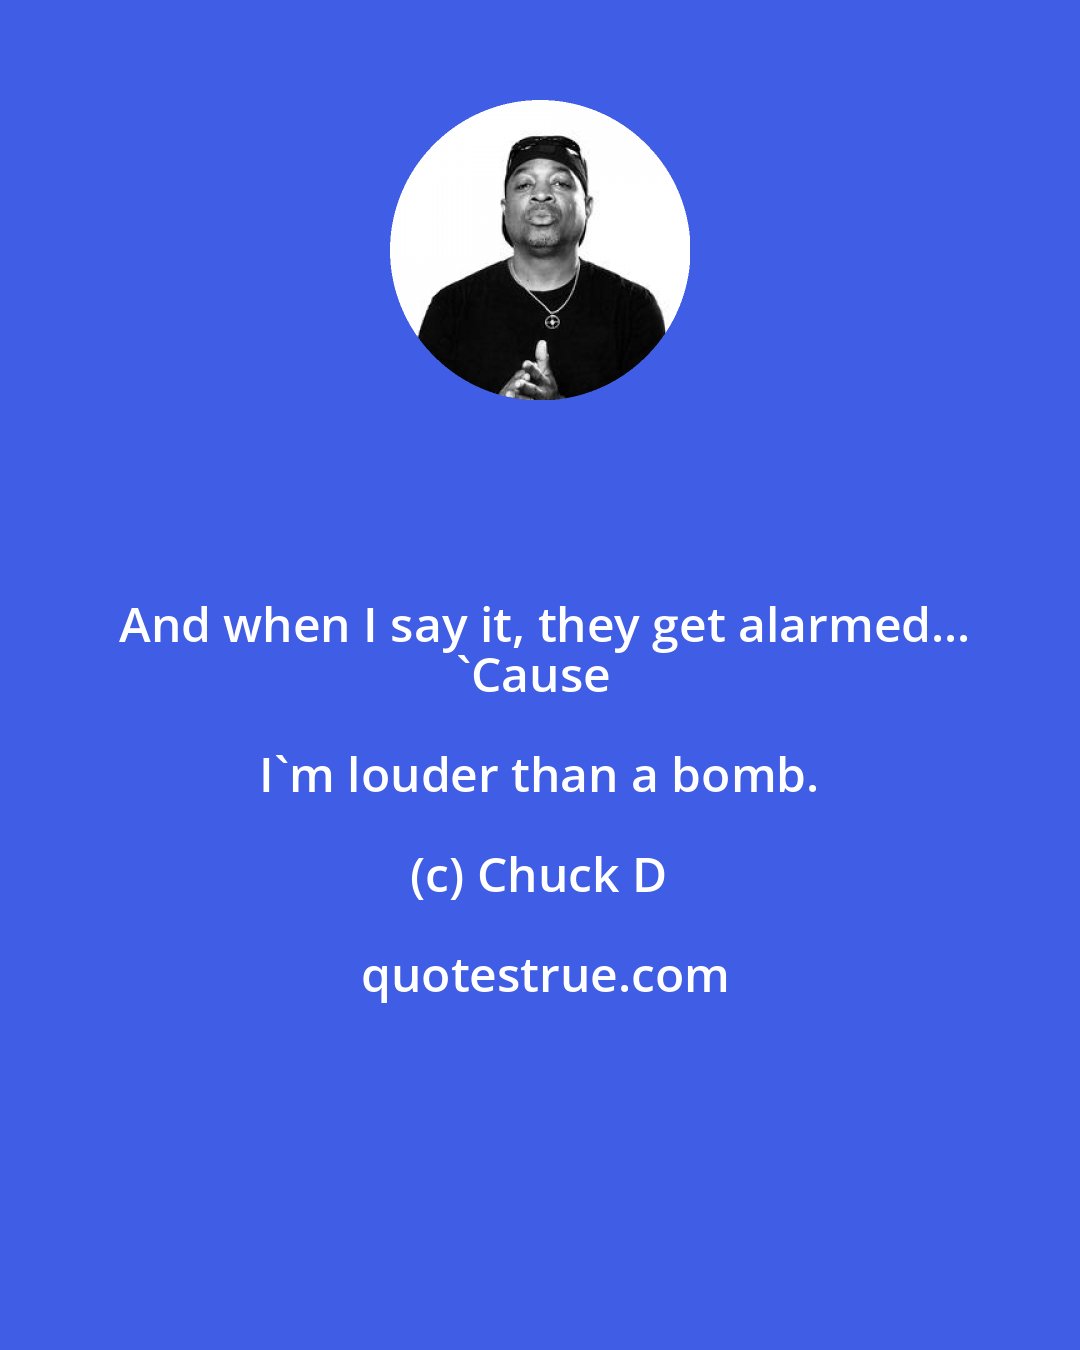 Chuck D: And when I say it, they get alarmed...
'Cause I'm louder than a bomb.